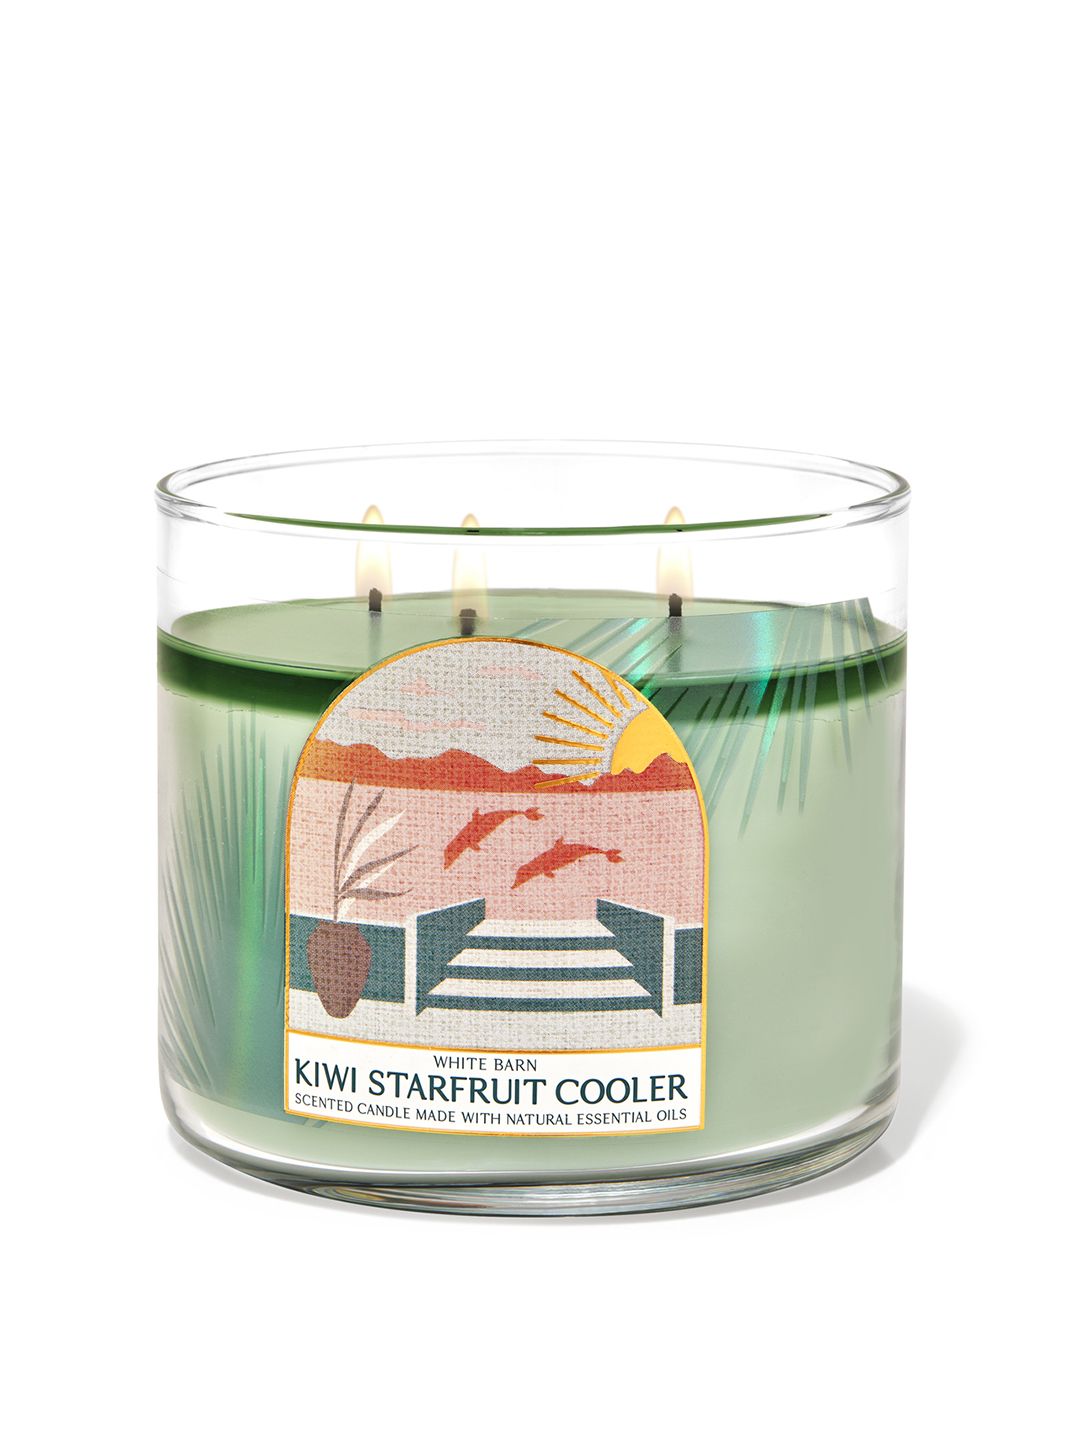 Bath & Body Works Kiwi Starfruit Cooler 3-Wick Scented Candle - 411 g Price in India